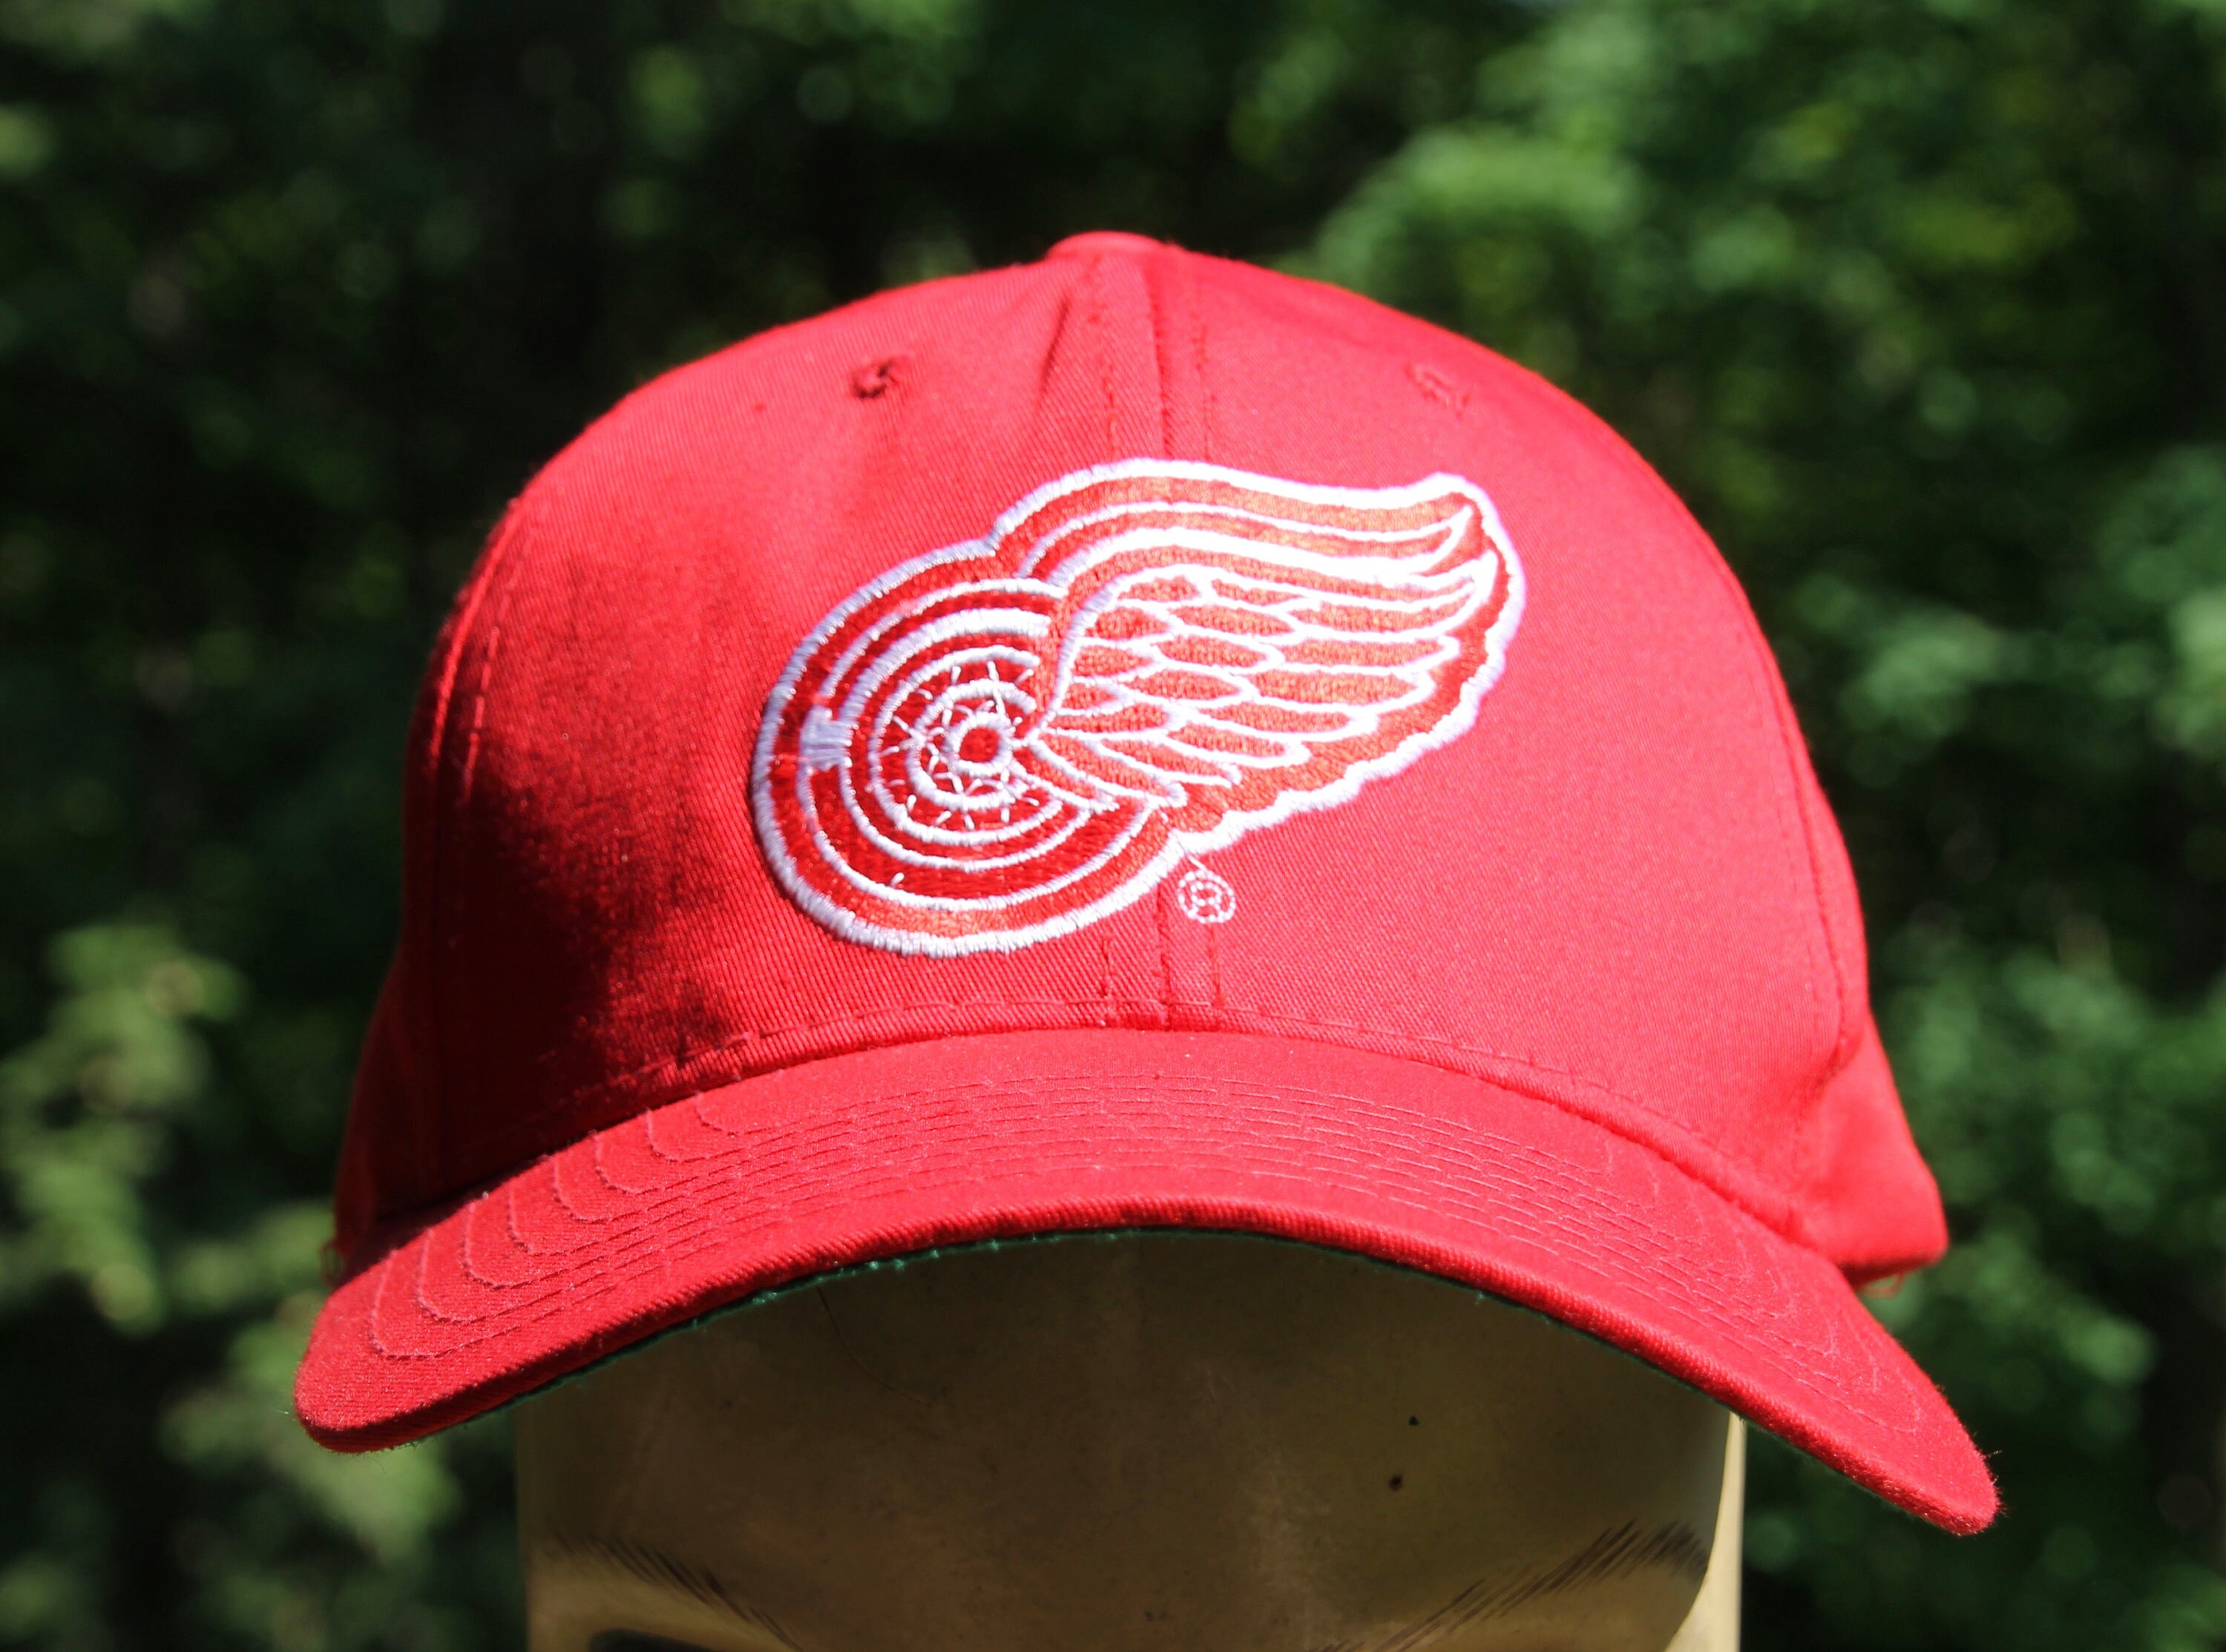 with Love Snapback Vntg Detroit Red Wings